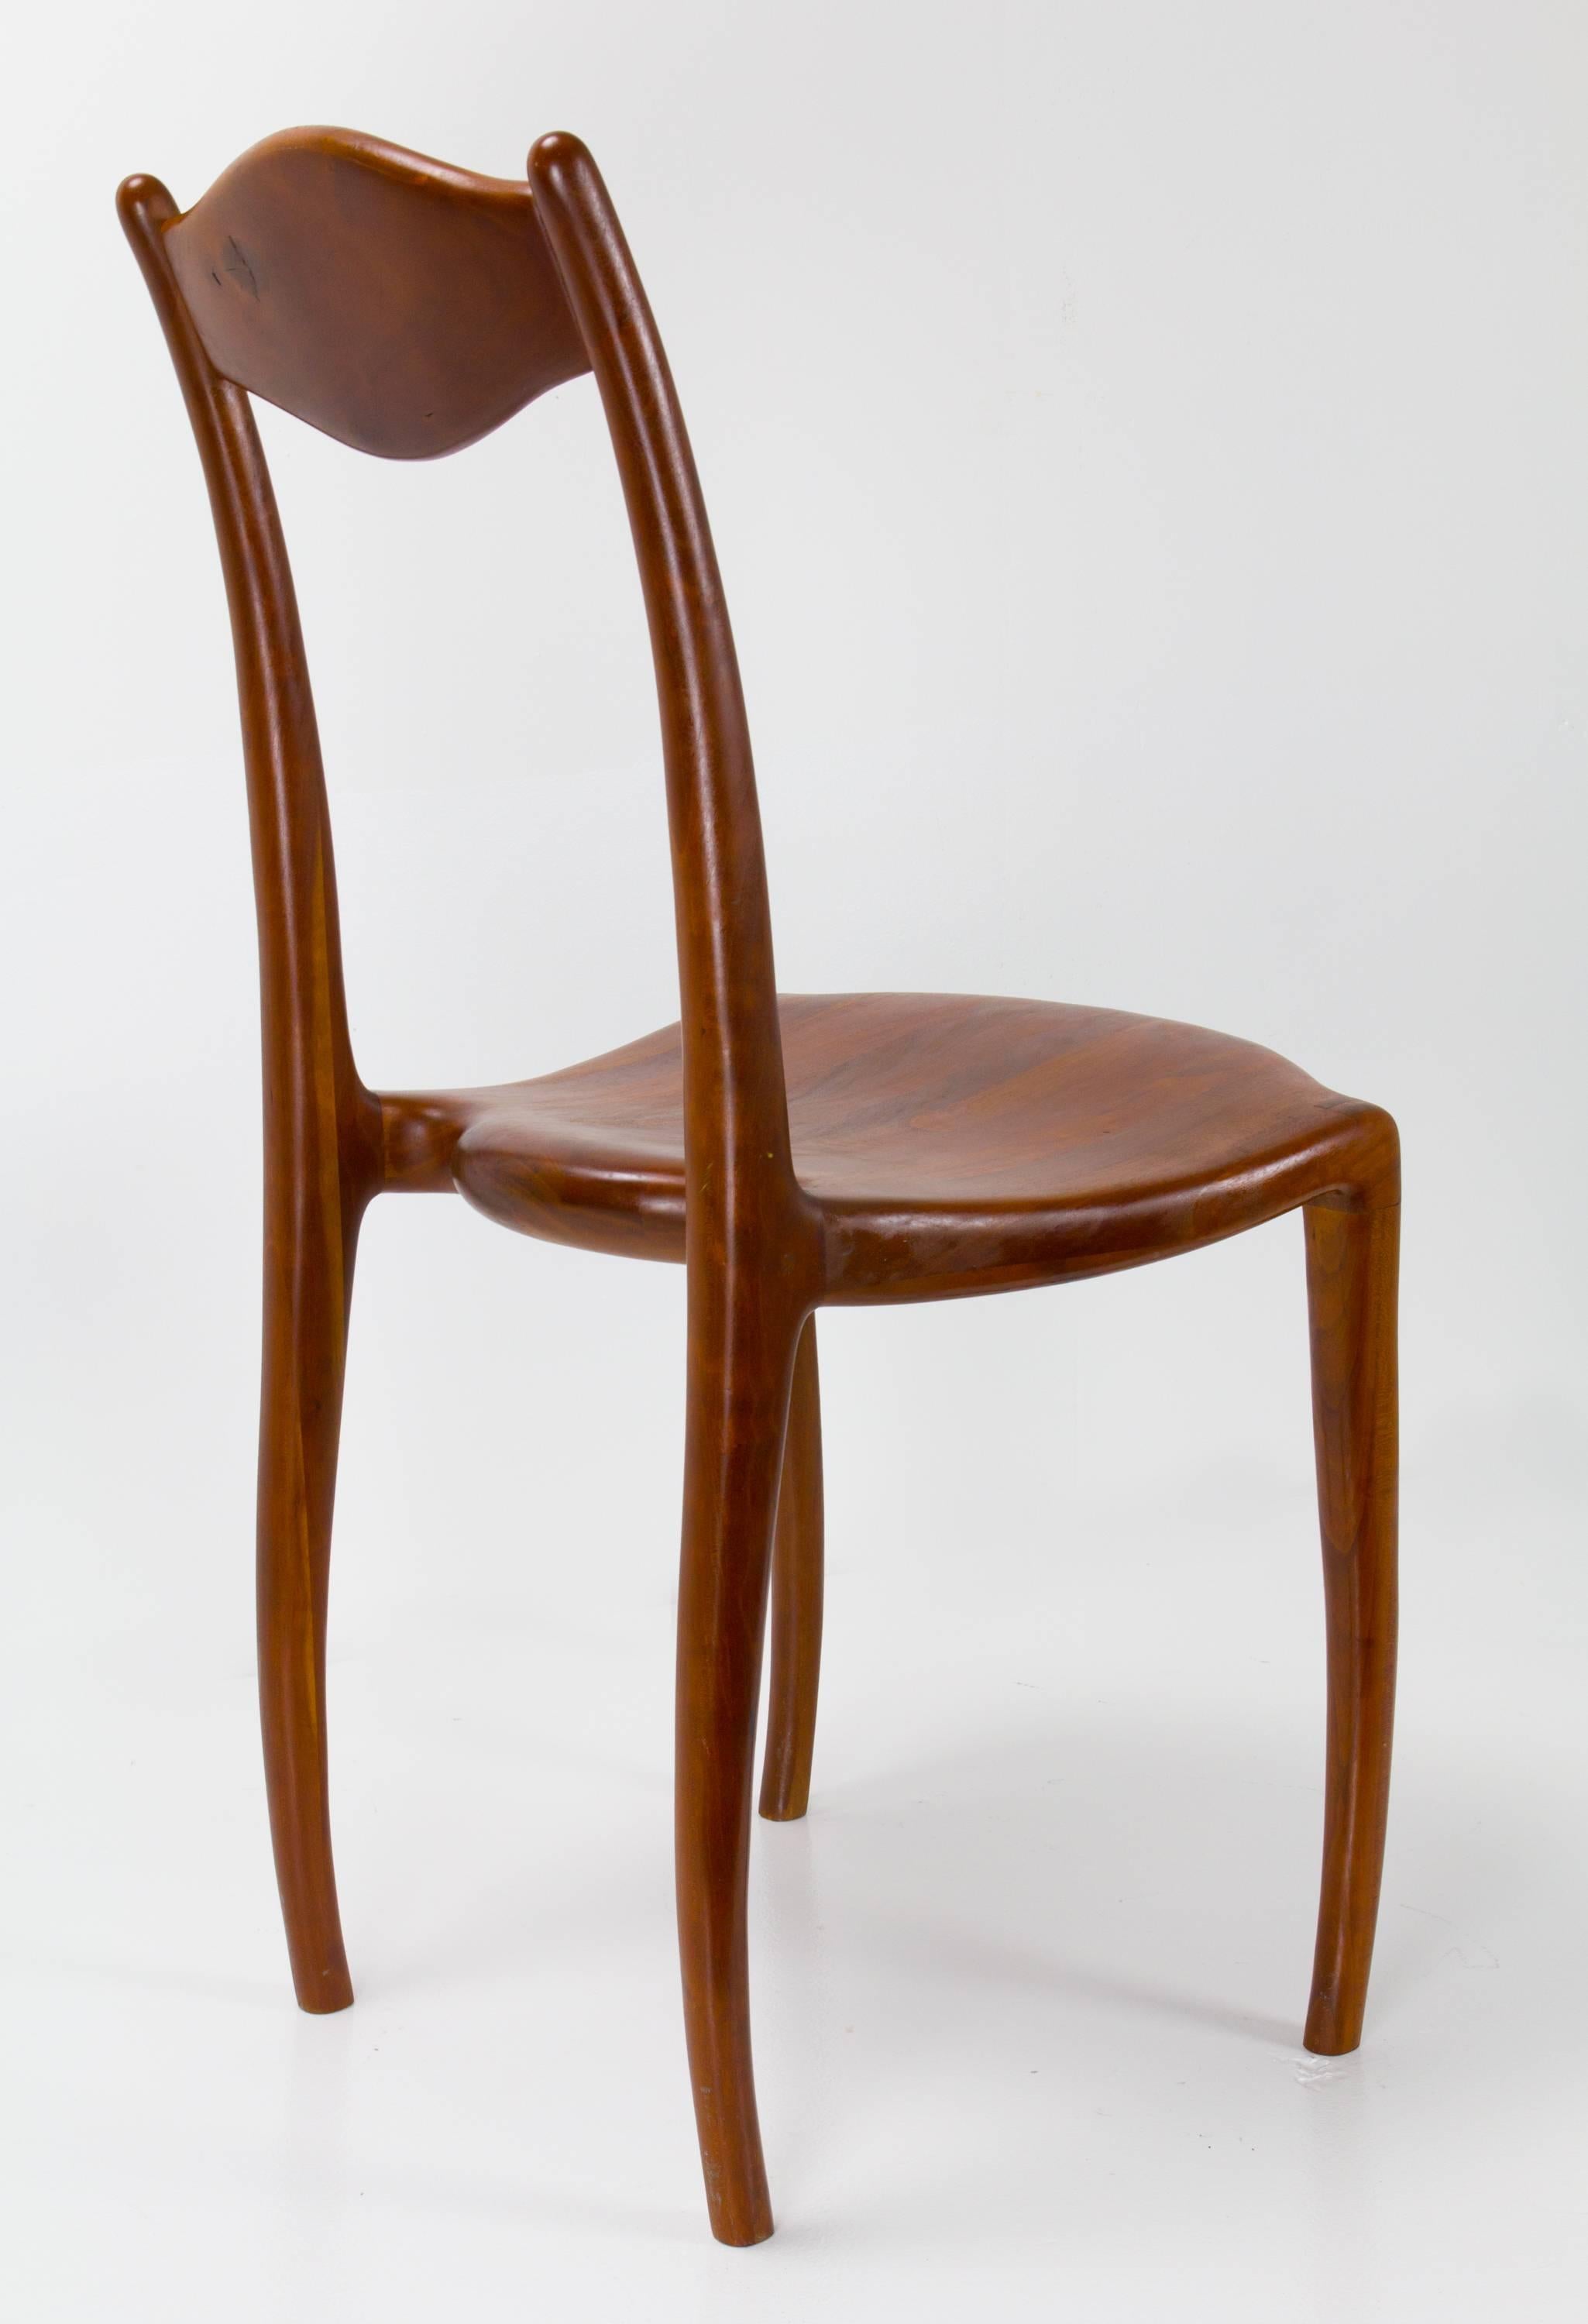 American studio craft movement chair in solid cherry by Stewart Paul with whimsical construction detail including inward bending carved legs.